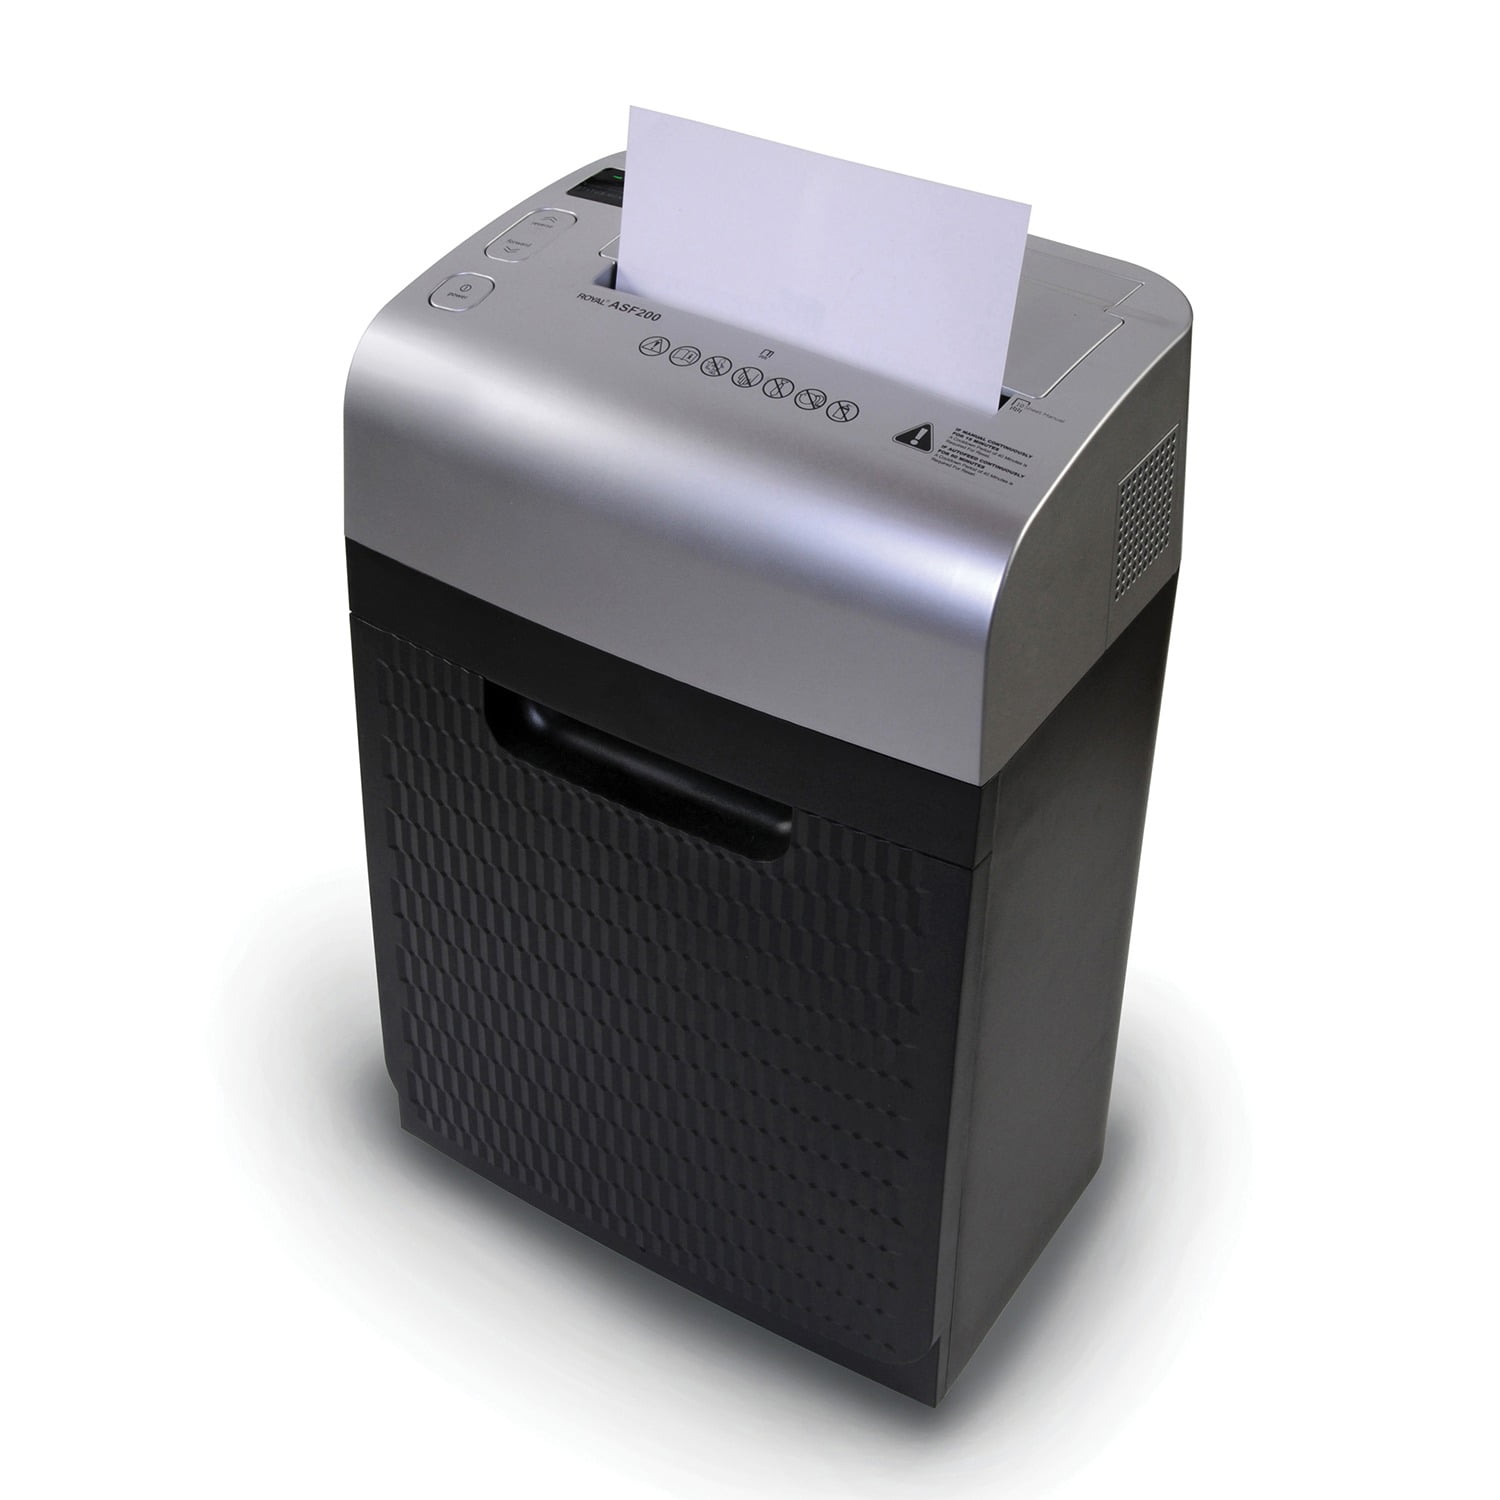 Costco Paper Shredders: A Guide to Selecting the Right Model缩略图